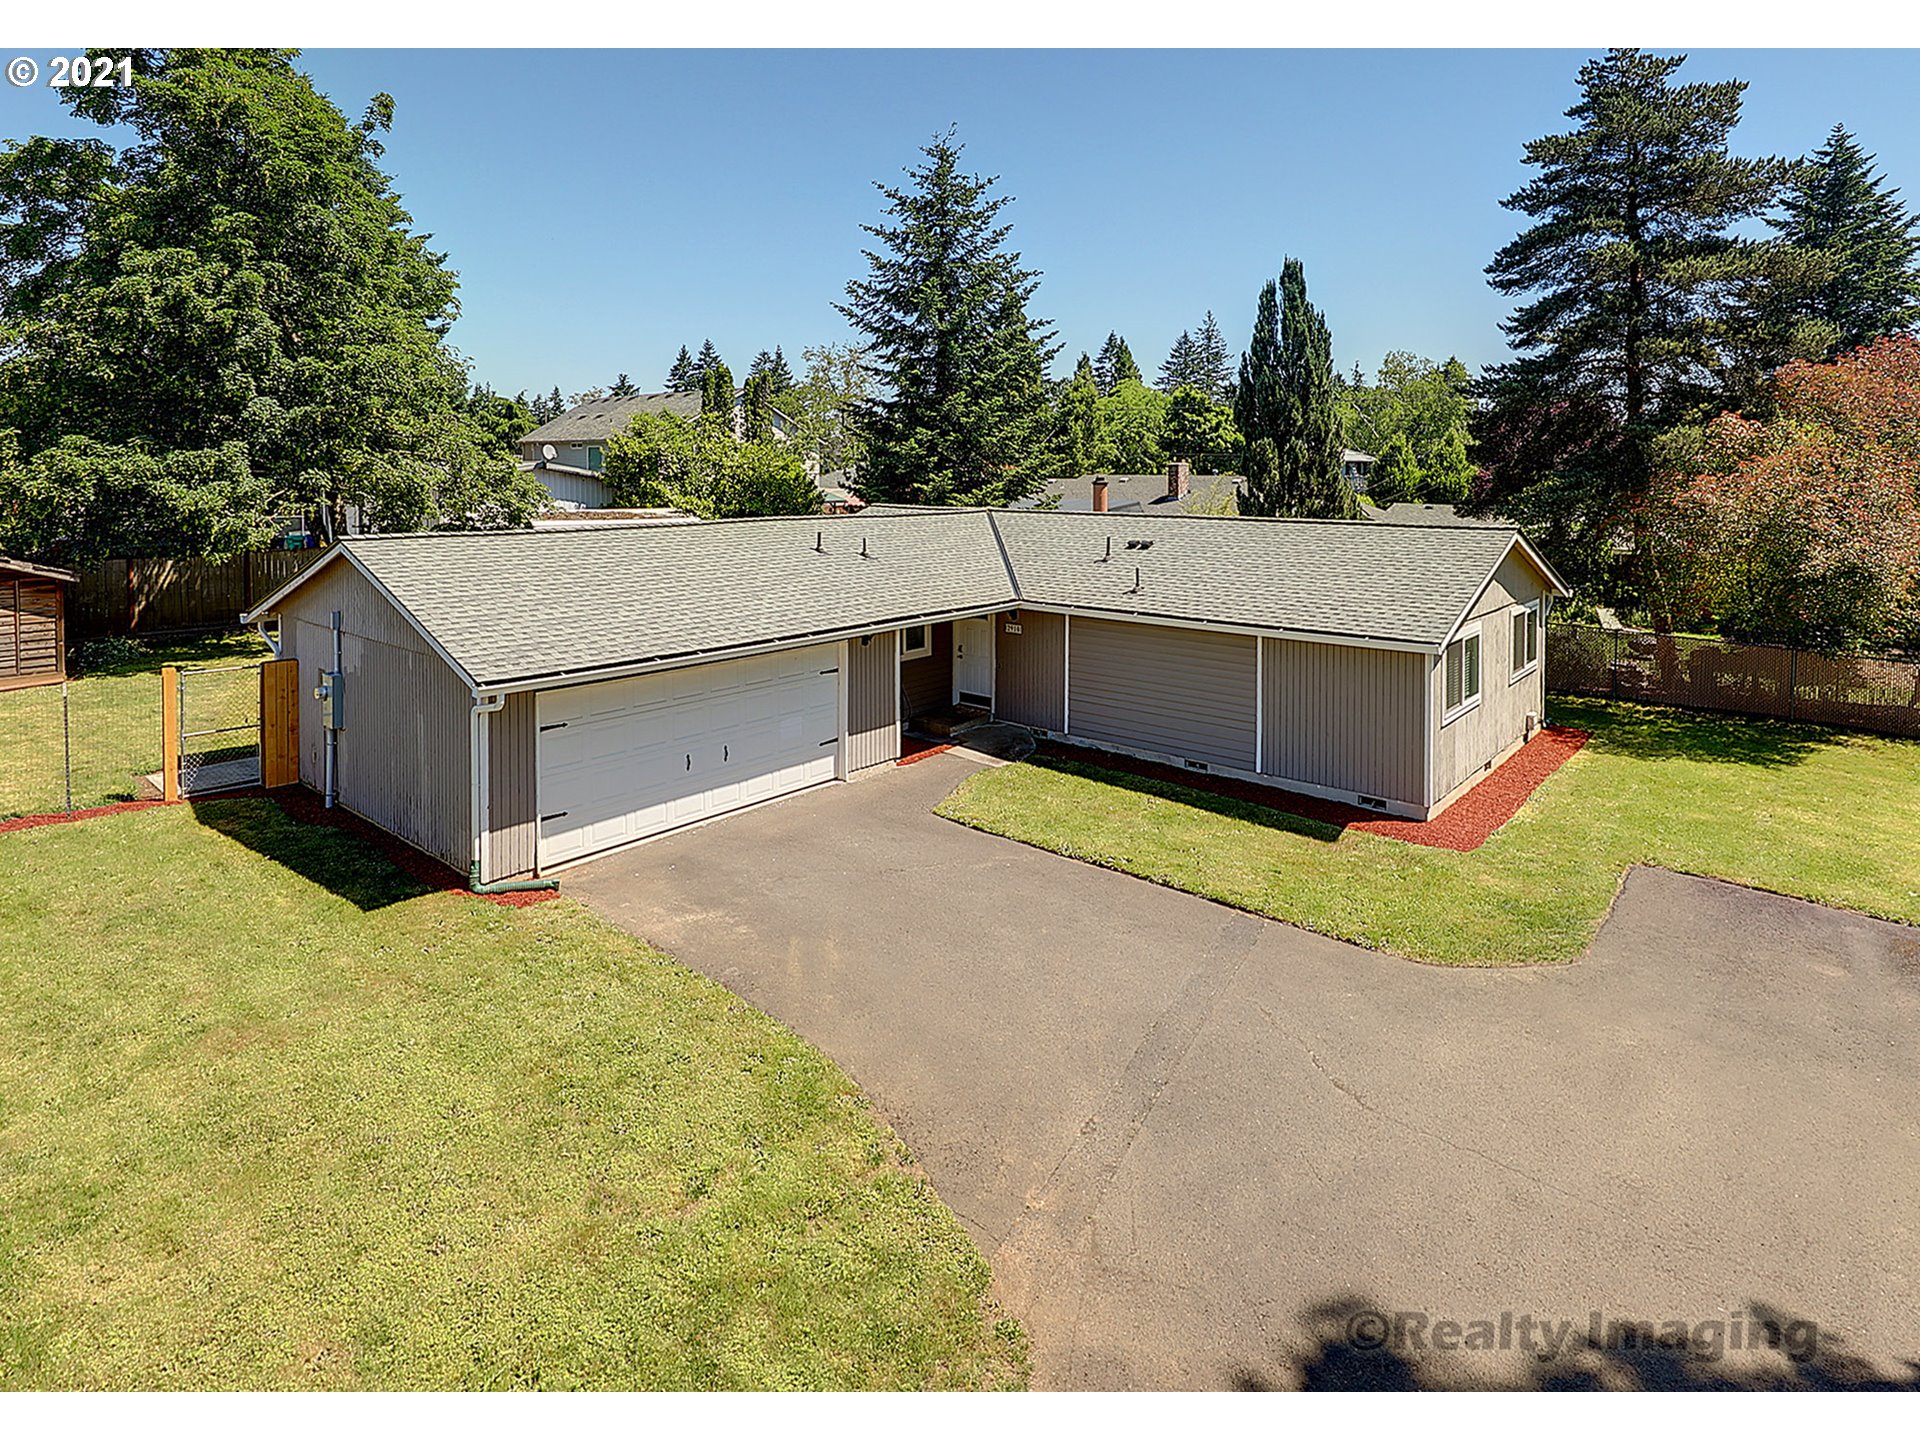 2910 SE 129TH AVE (1 of 15)